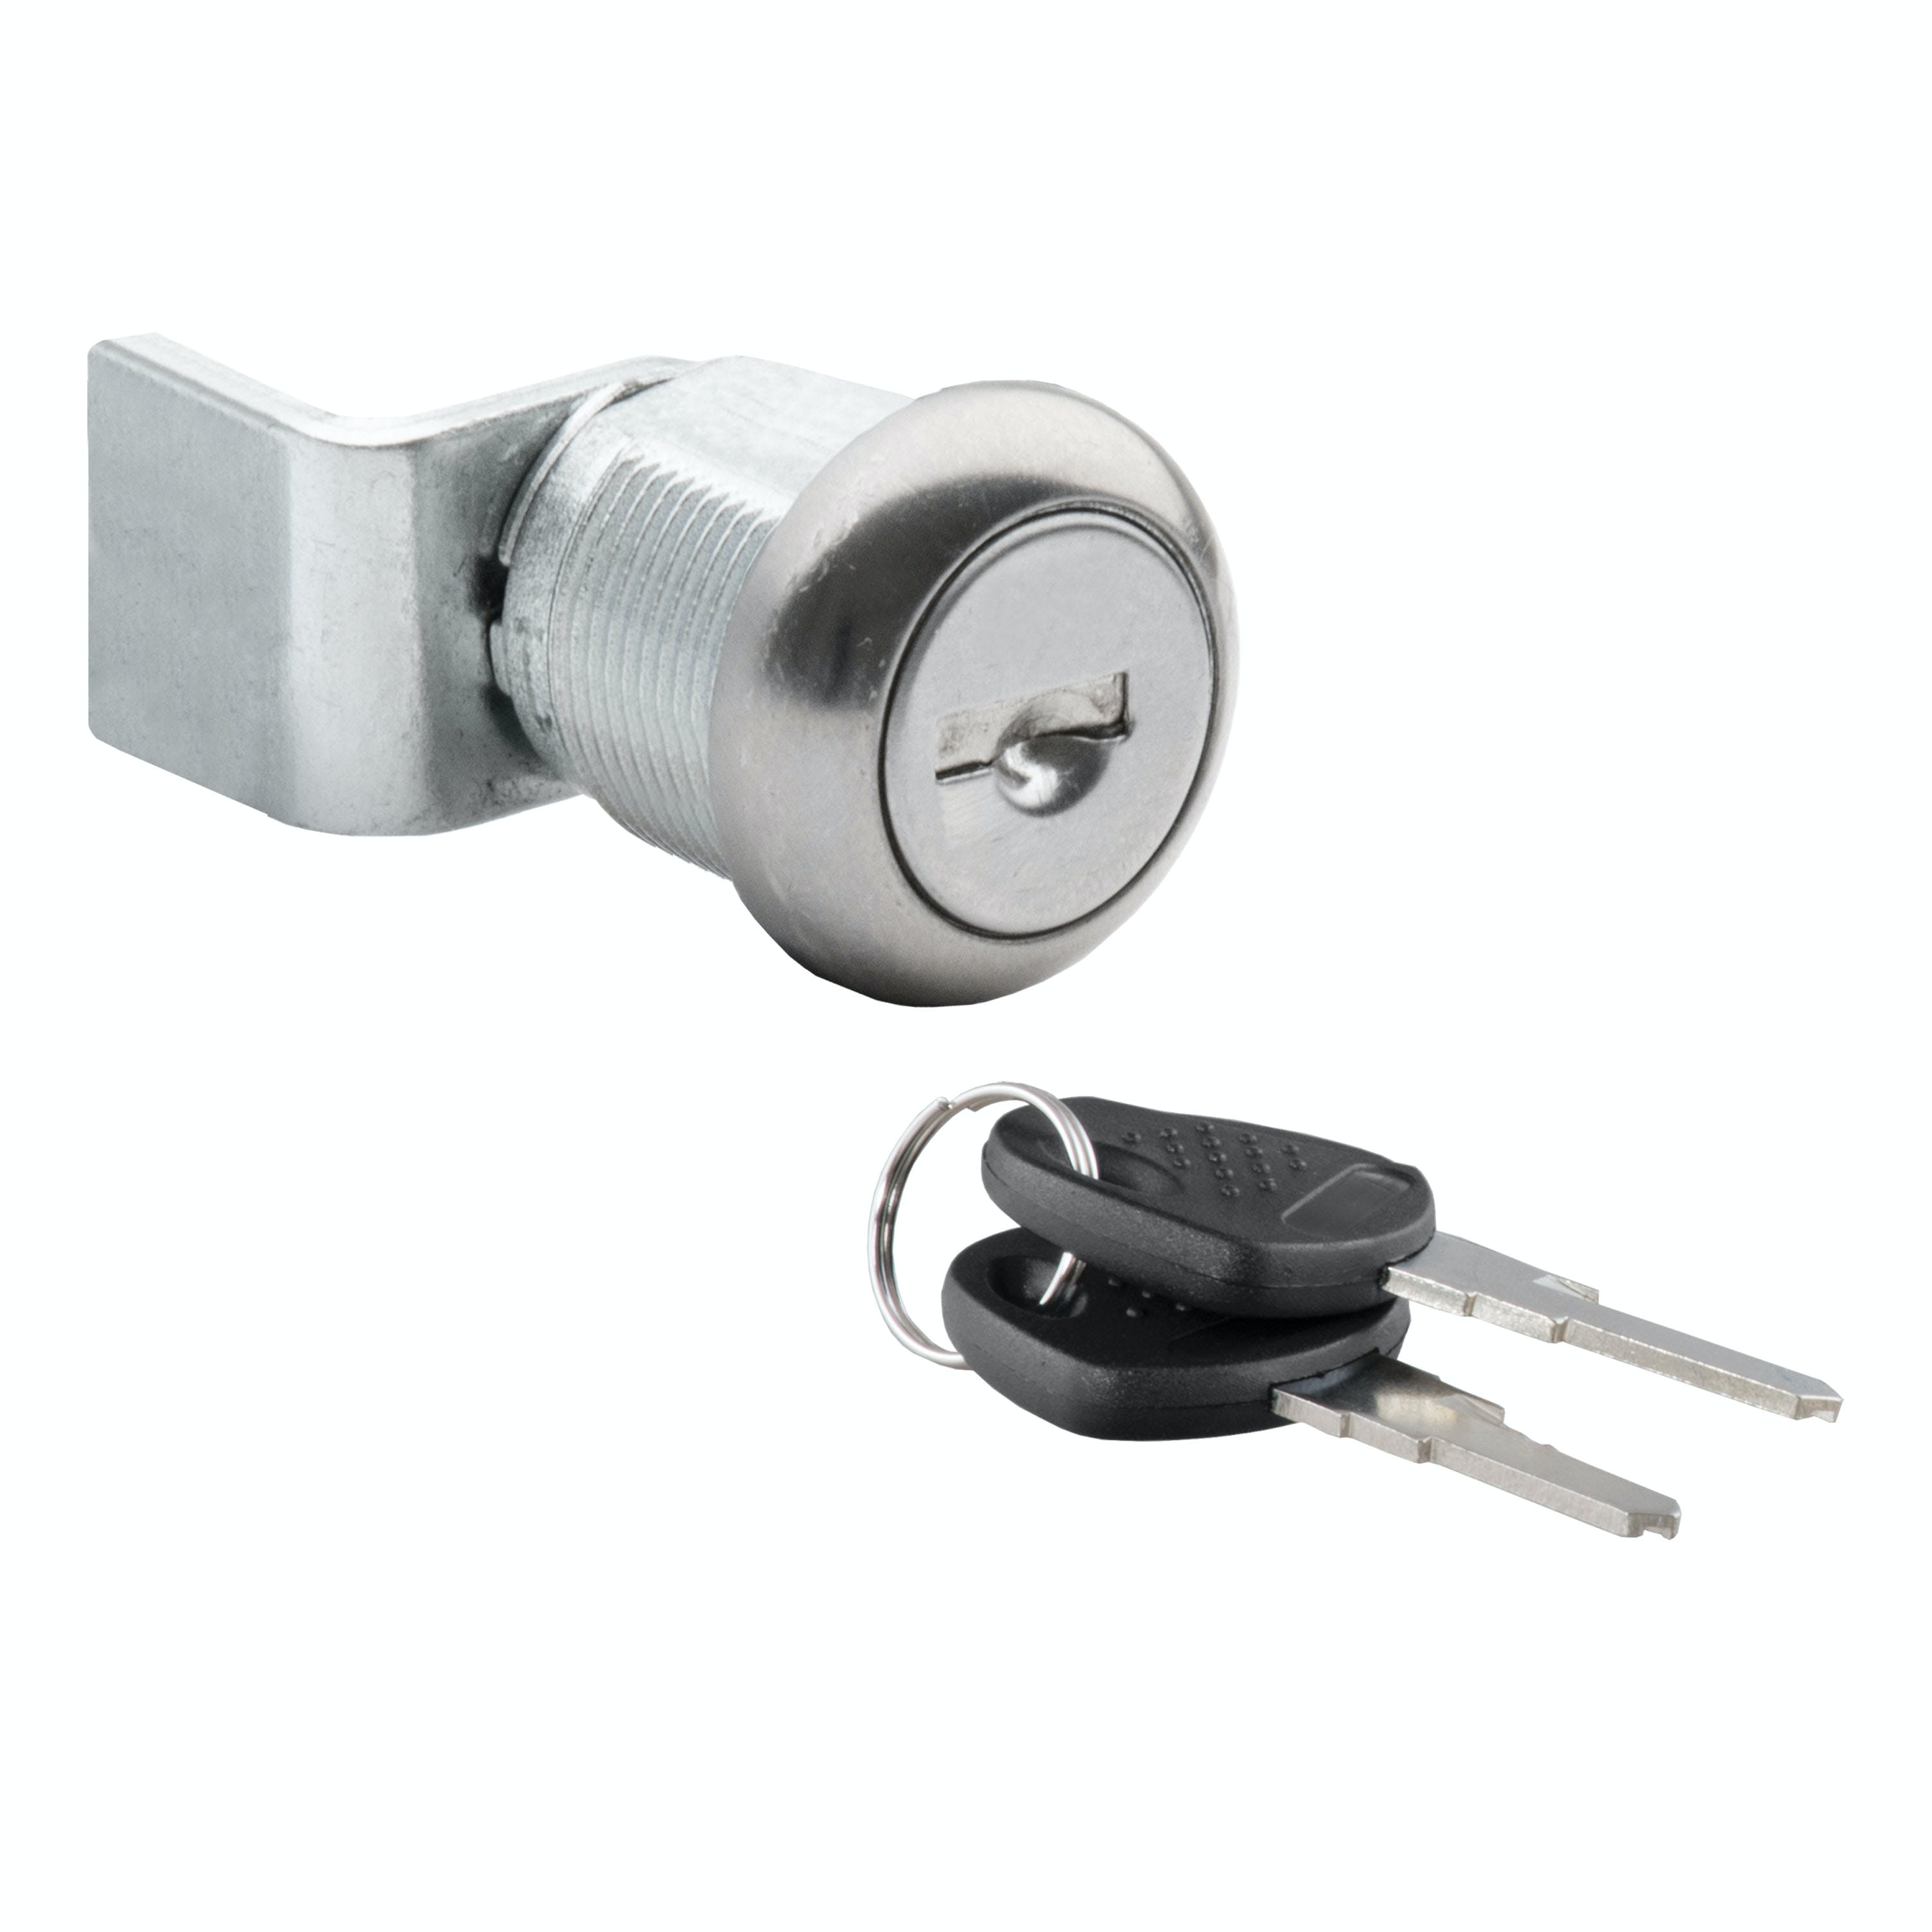 UWS 003-RYTHCY-006 Replacement T-Handle Lock Cylinder and Keys